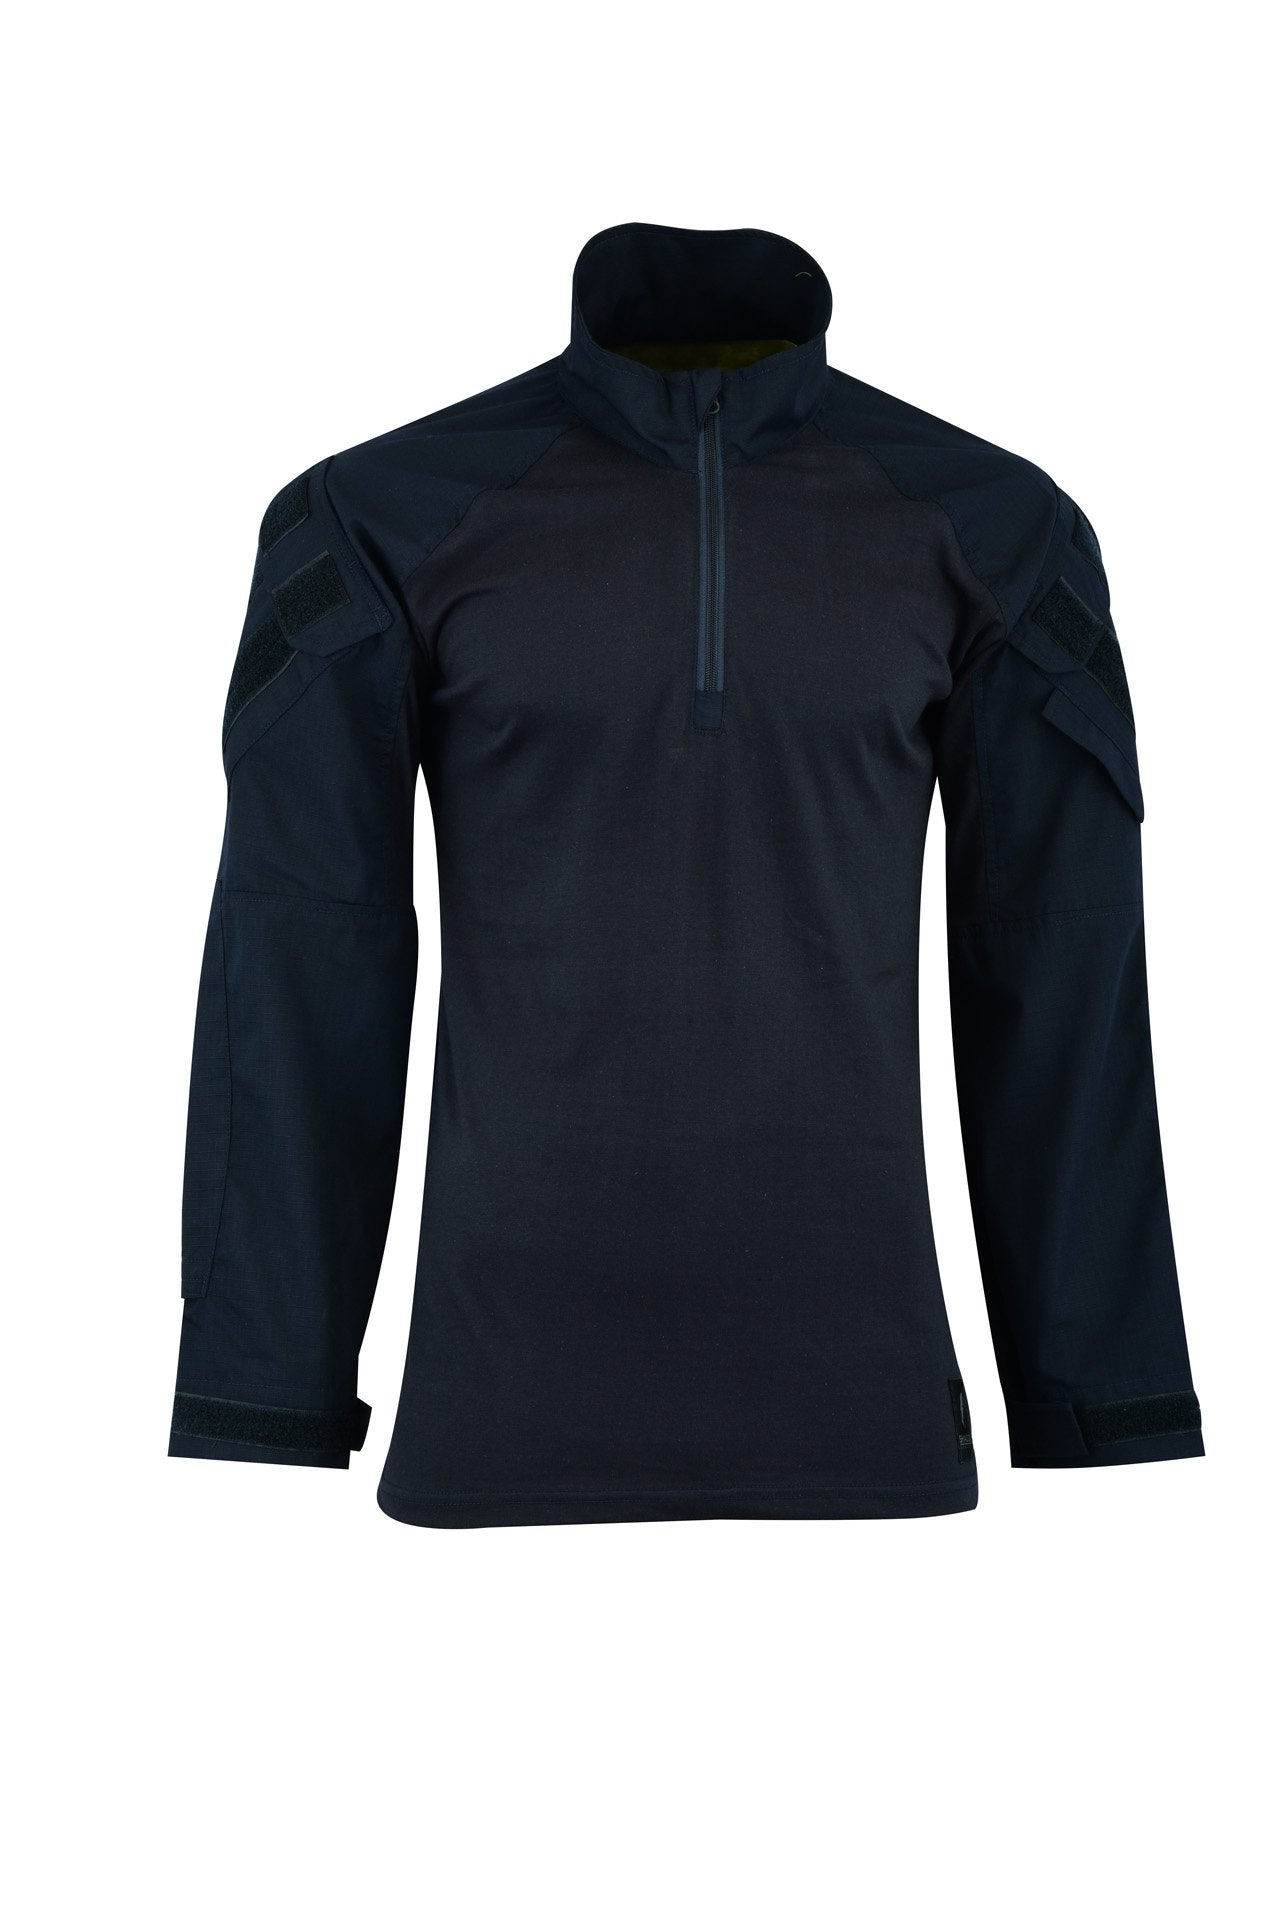 Tactical Zone HYBRID TACTICAL SHIRT IS A PERFECT COMBAT SHIRT Colour  Navy blue